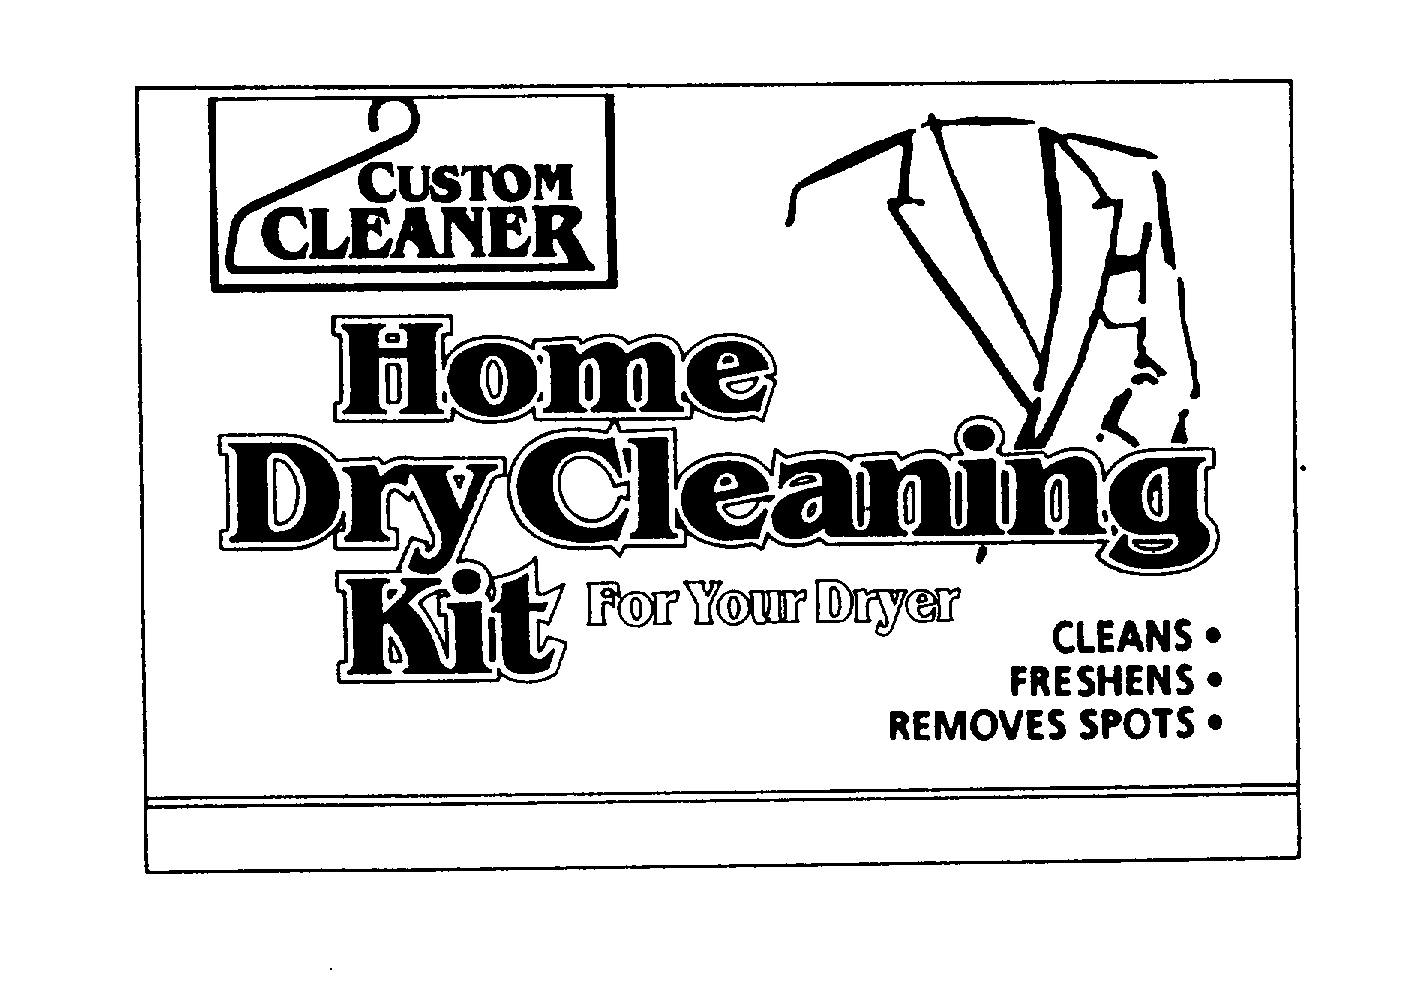  CUSTOM CLEANER HOME DRY CLEANING KIT FOR YOUR DRYER CLEANS FRESHENS REMOVES SPOTS